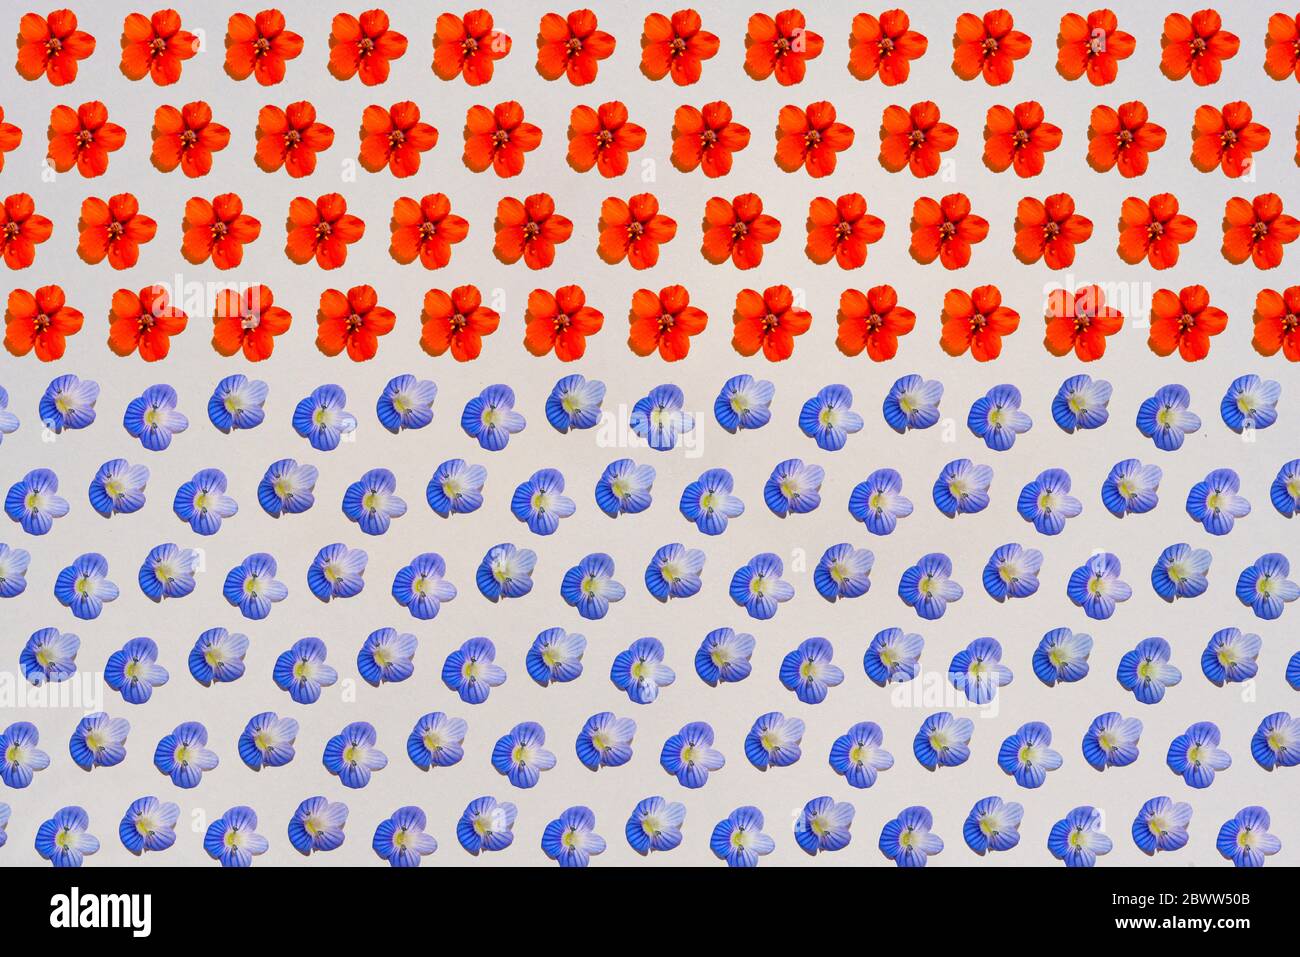 Pattern of rows of blue and red flower heads Stock Photo